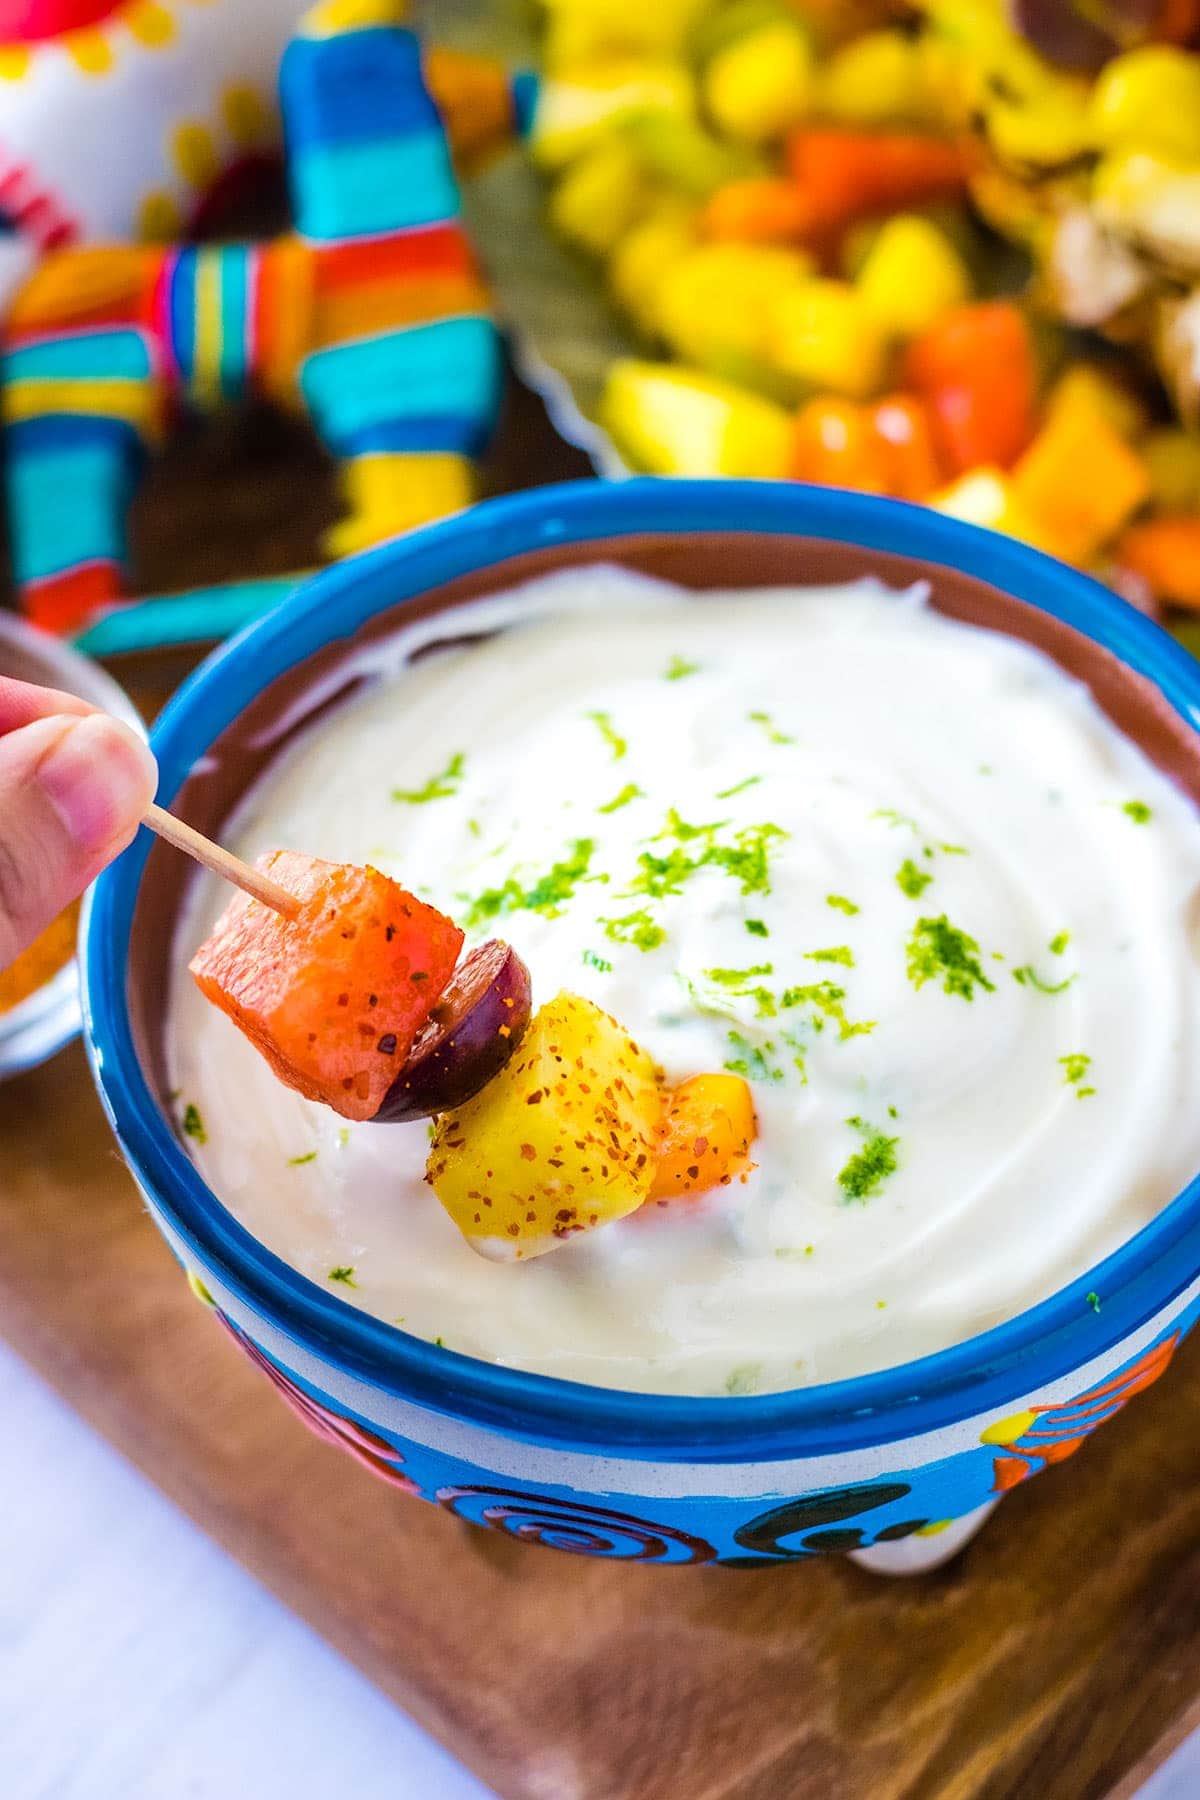 A fruit kabob being dipped in sweet lime yogurt dip. The dip is in a brightly colored bowl with a blue rim set on a wooden tray.